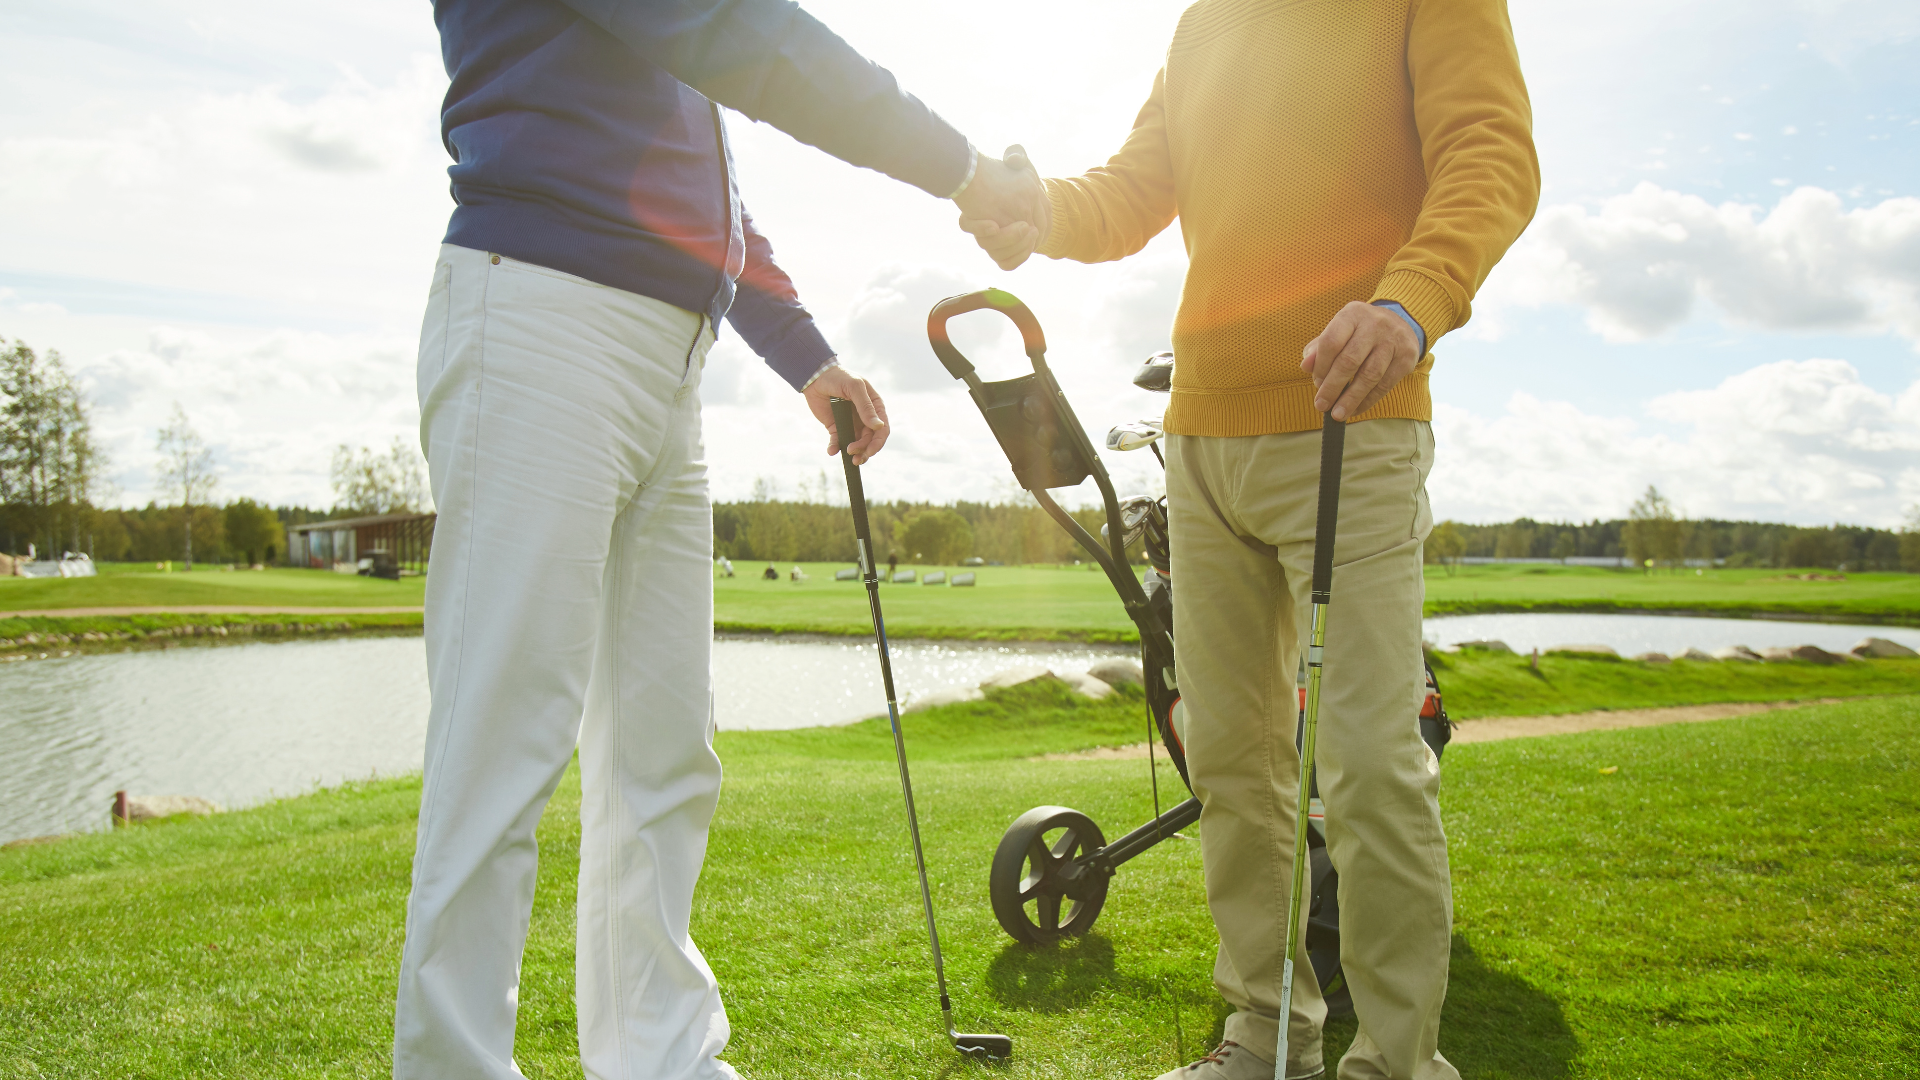 Two golfers shaking hands on the golf course